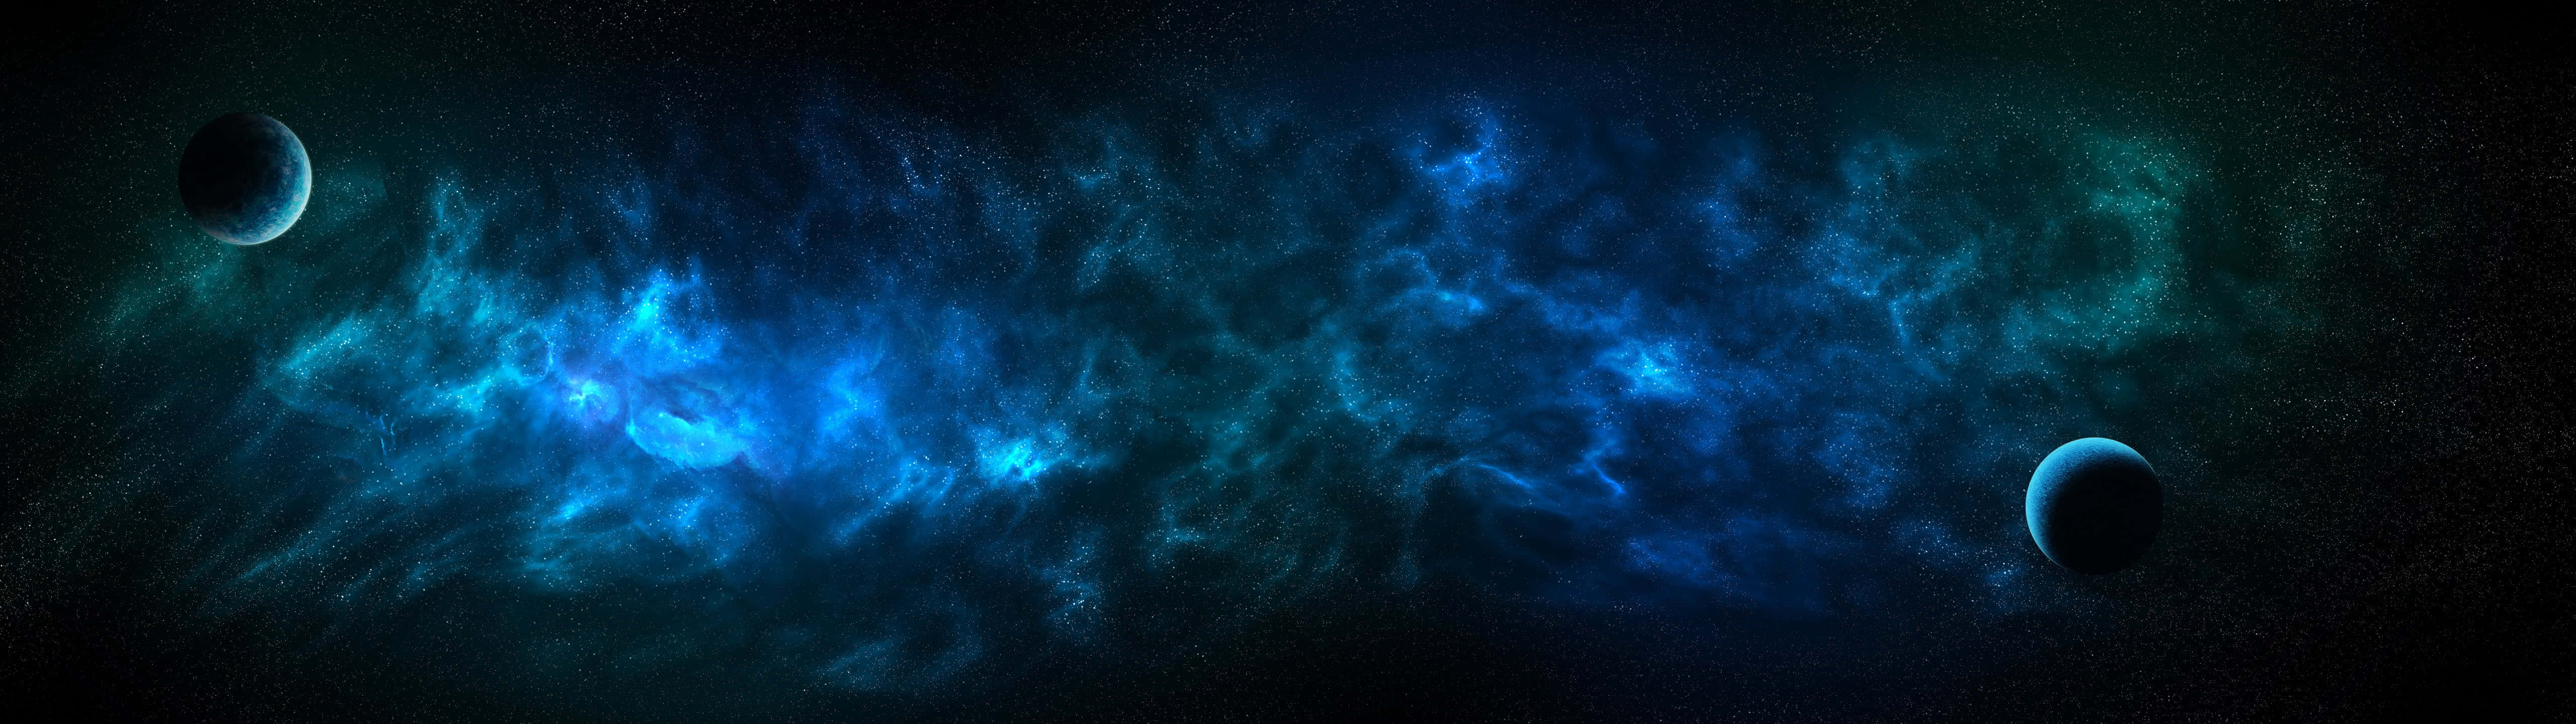 A Blue And Black Space With Two Blue Circles Wallpaper